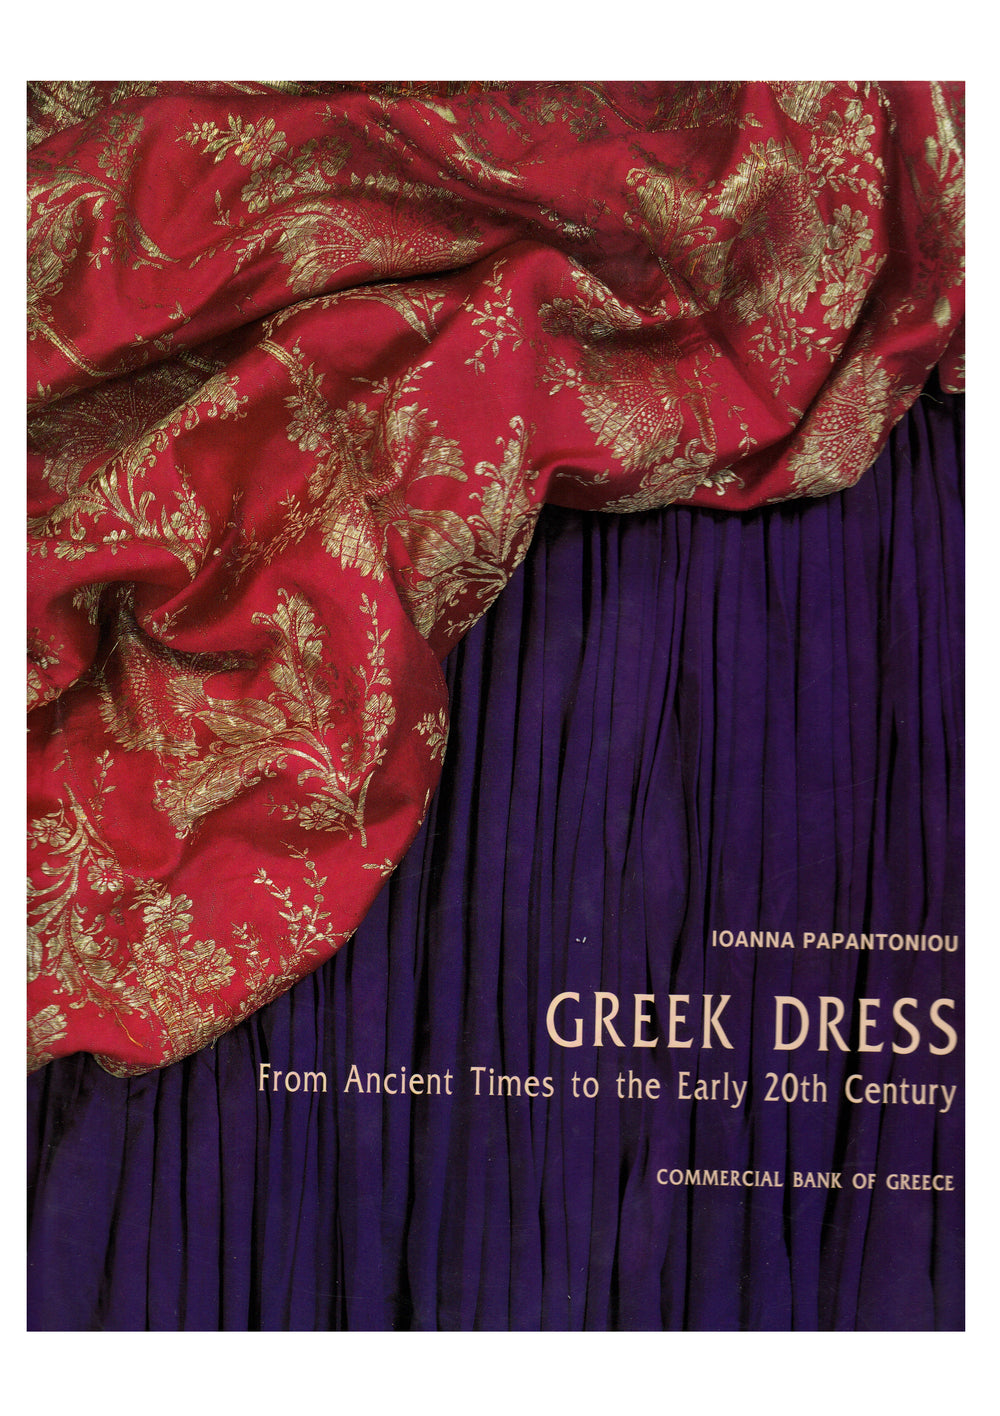 Greek dress. From ancient times to the early 20th century